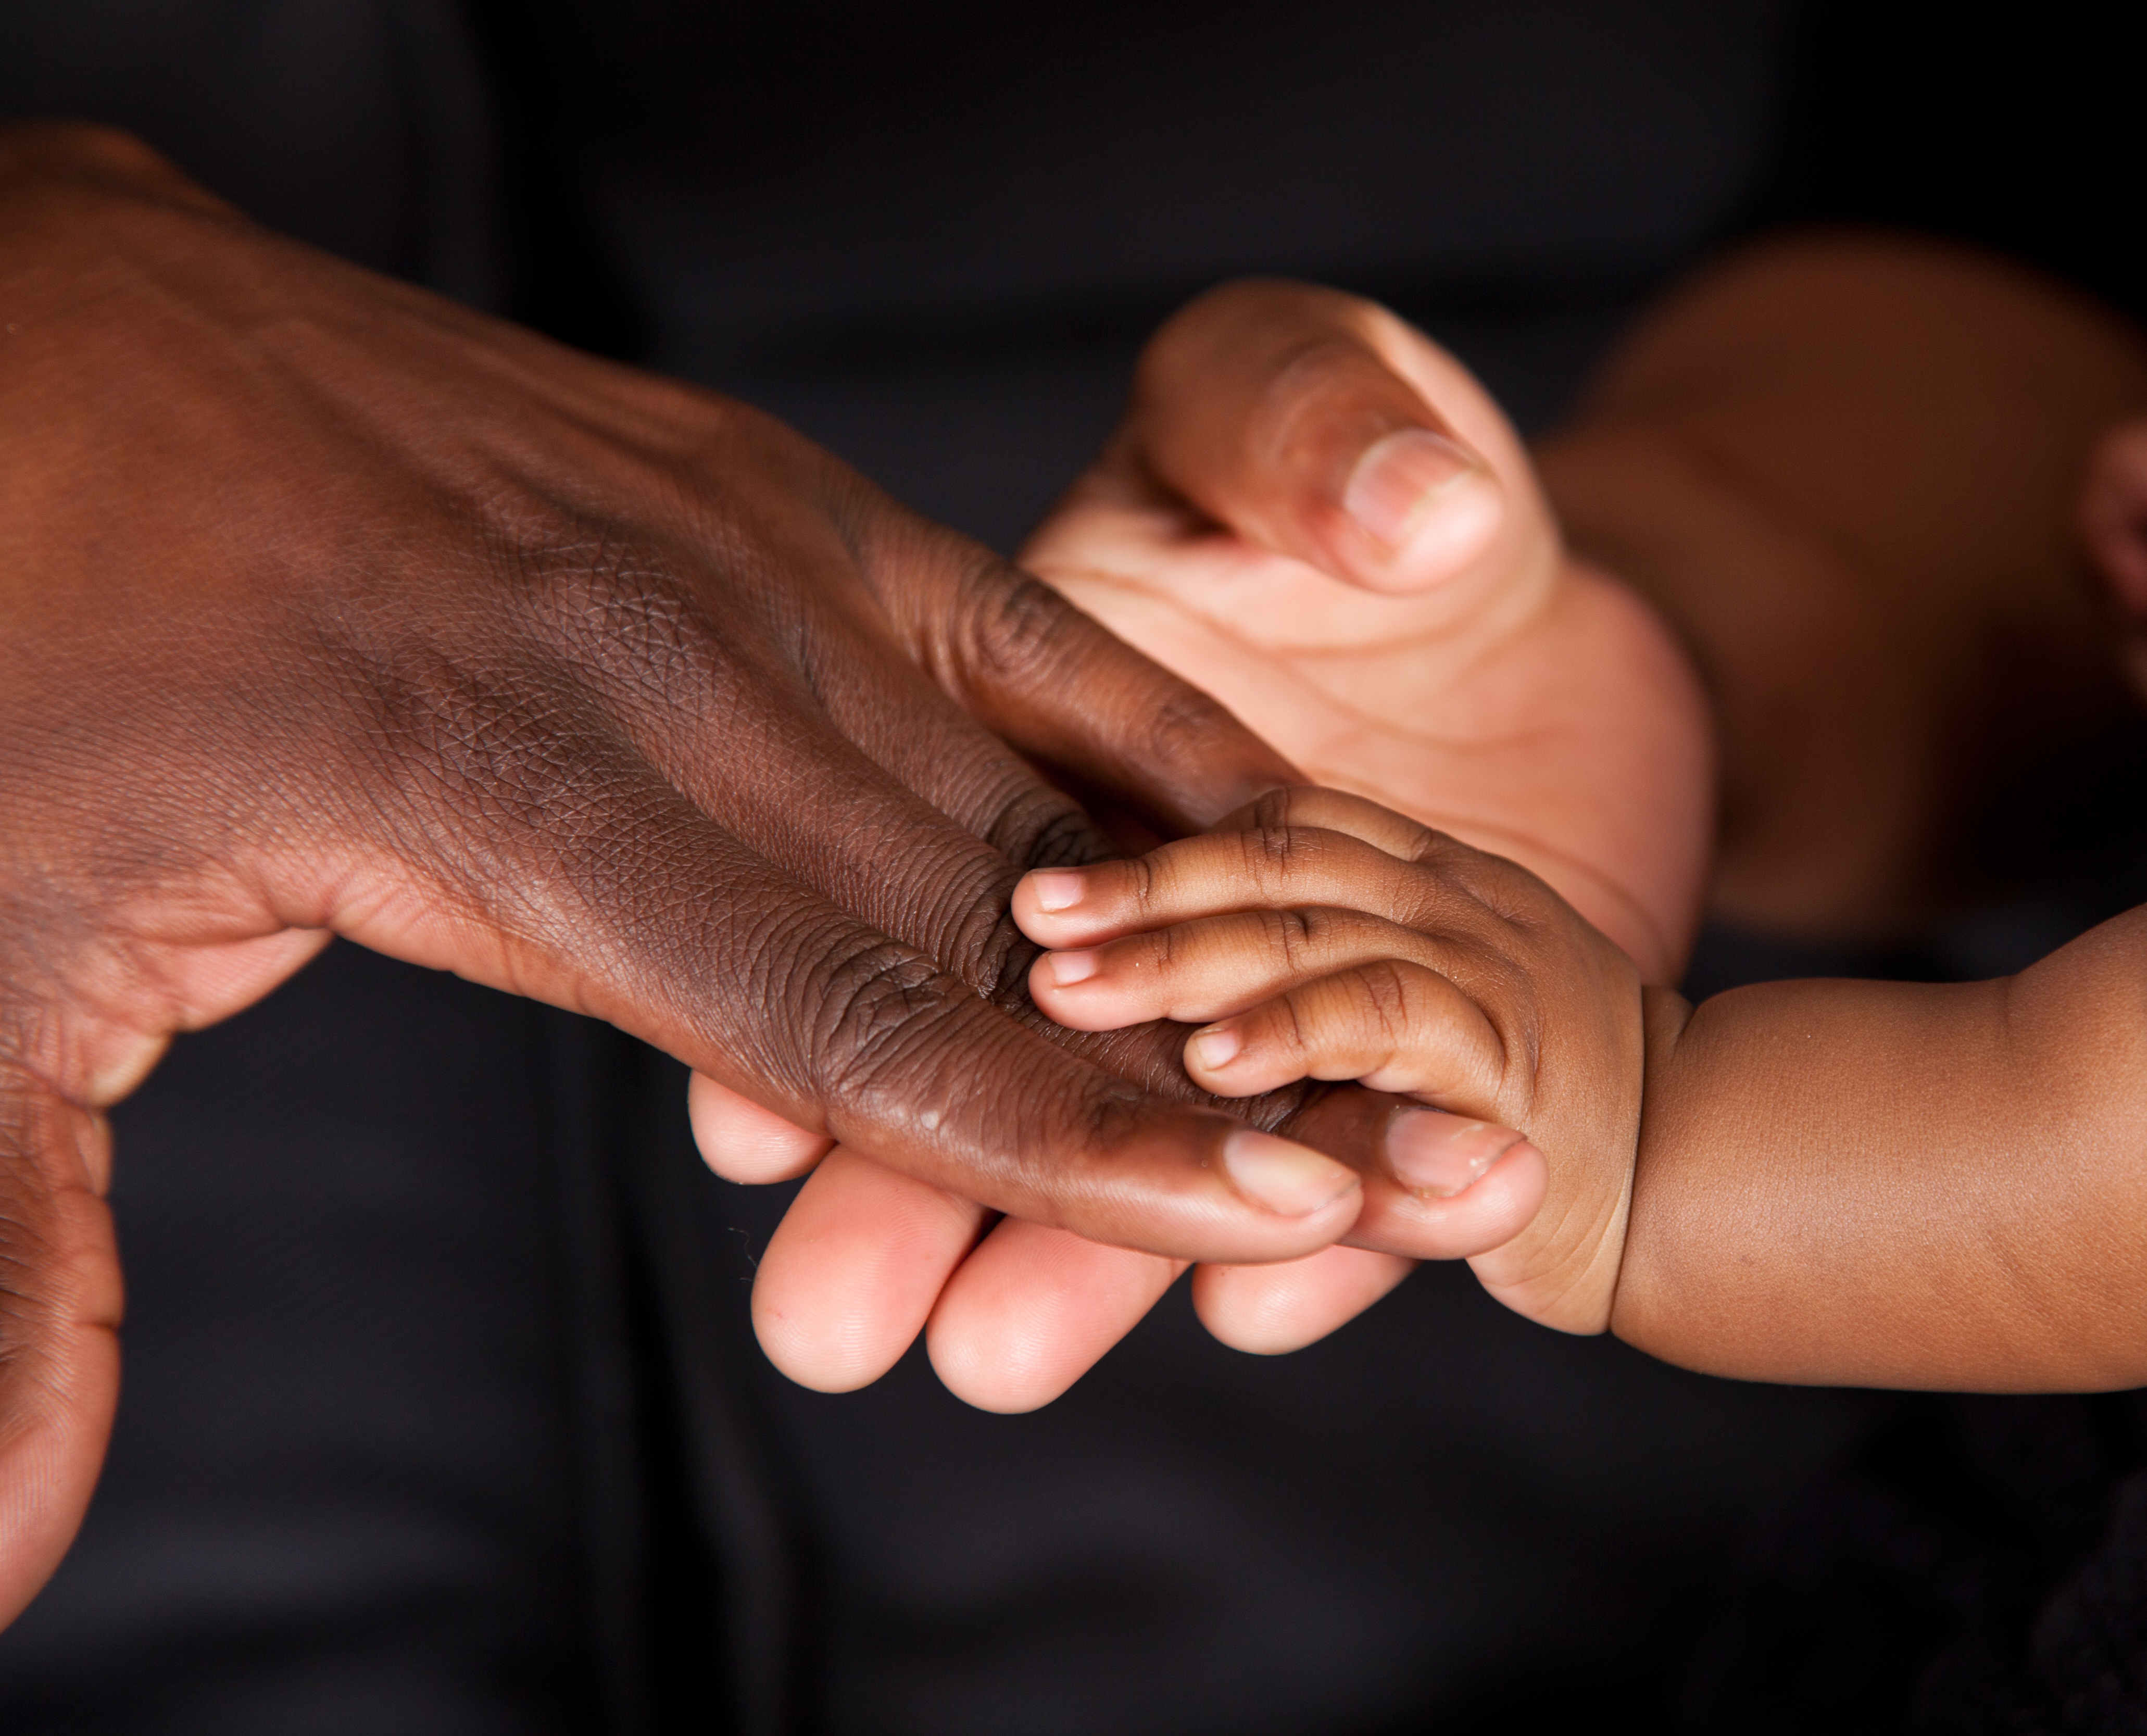 Reports show that the majority of aborted babies in Alabama and Georgia are black, making black babies the majority of unborn babies affected by the May abortion legislation.ChrisMilesProductions, Shutterstock